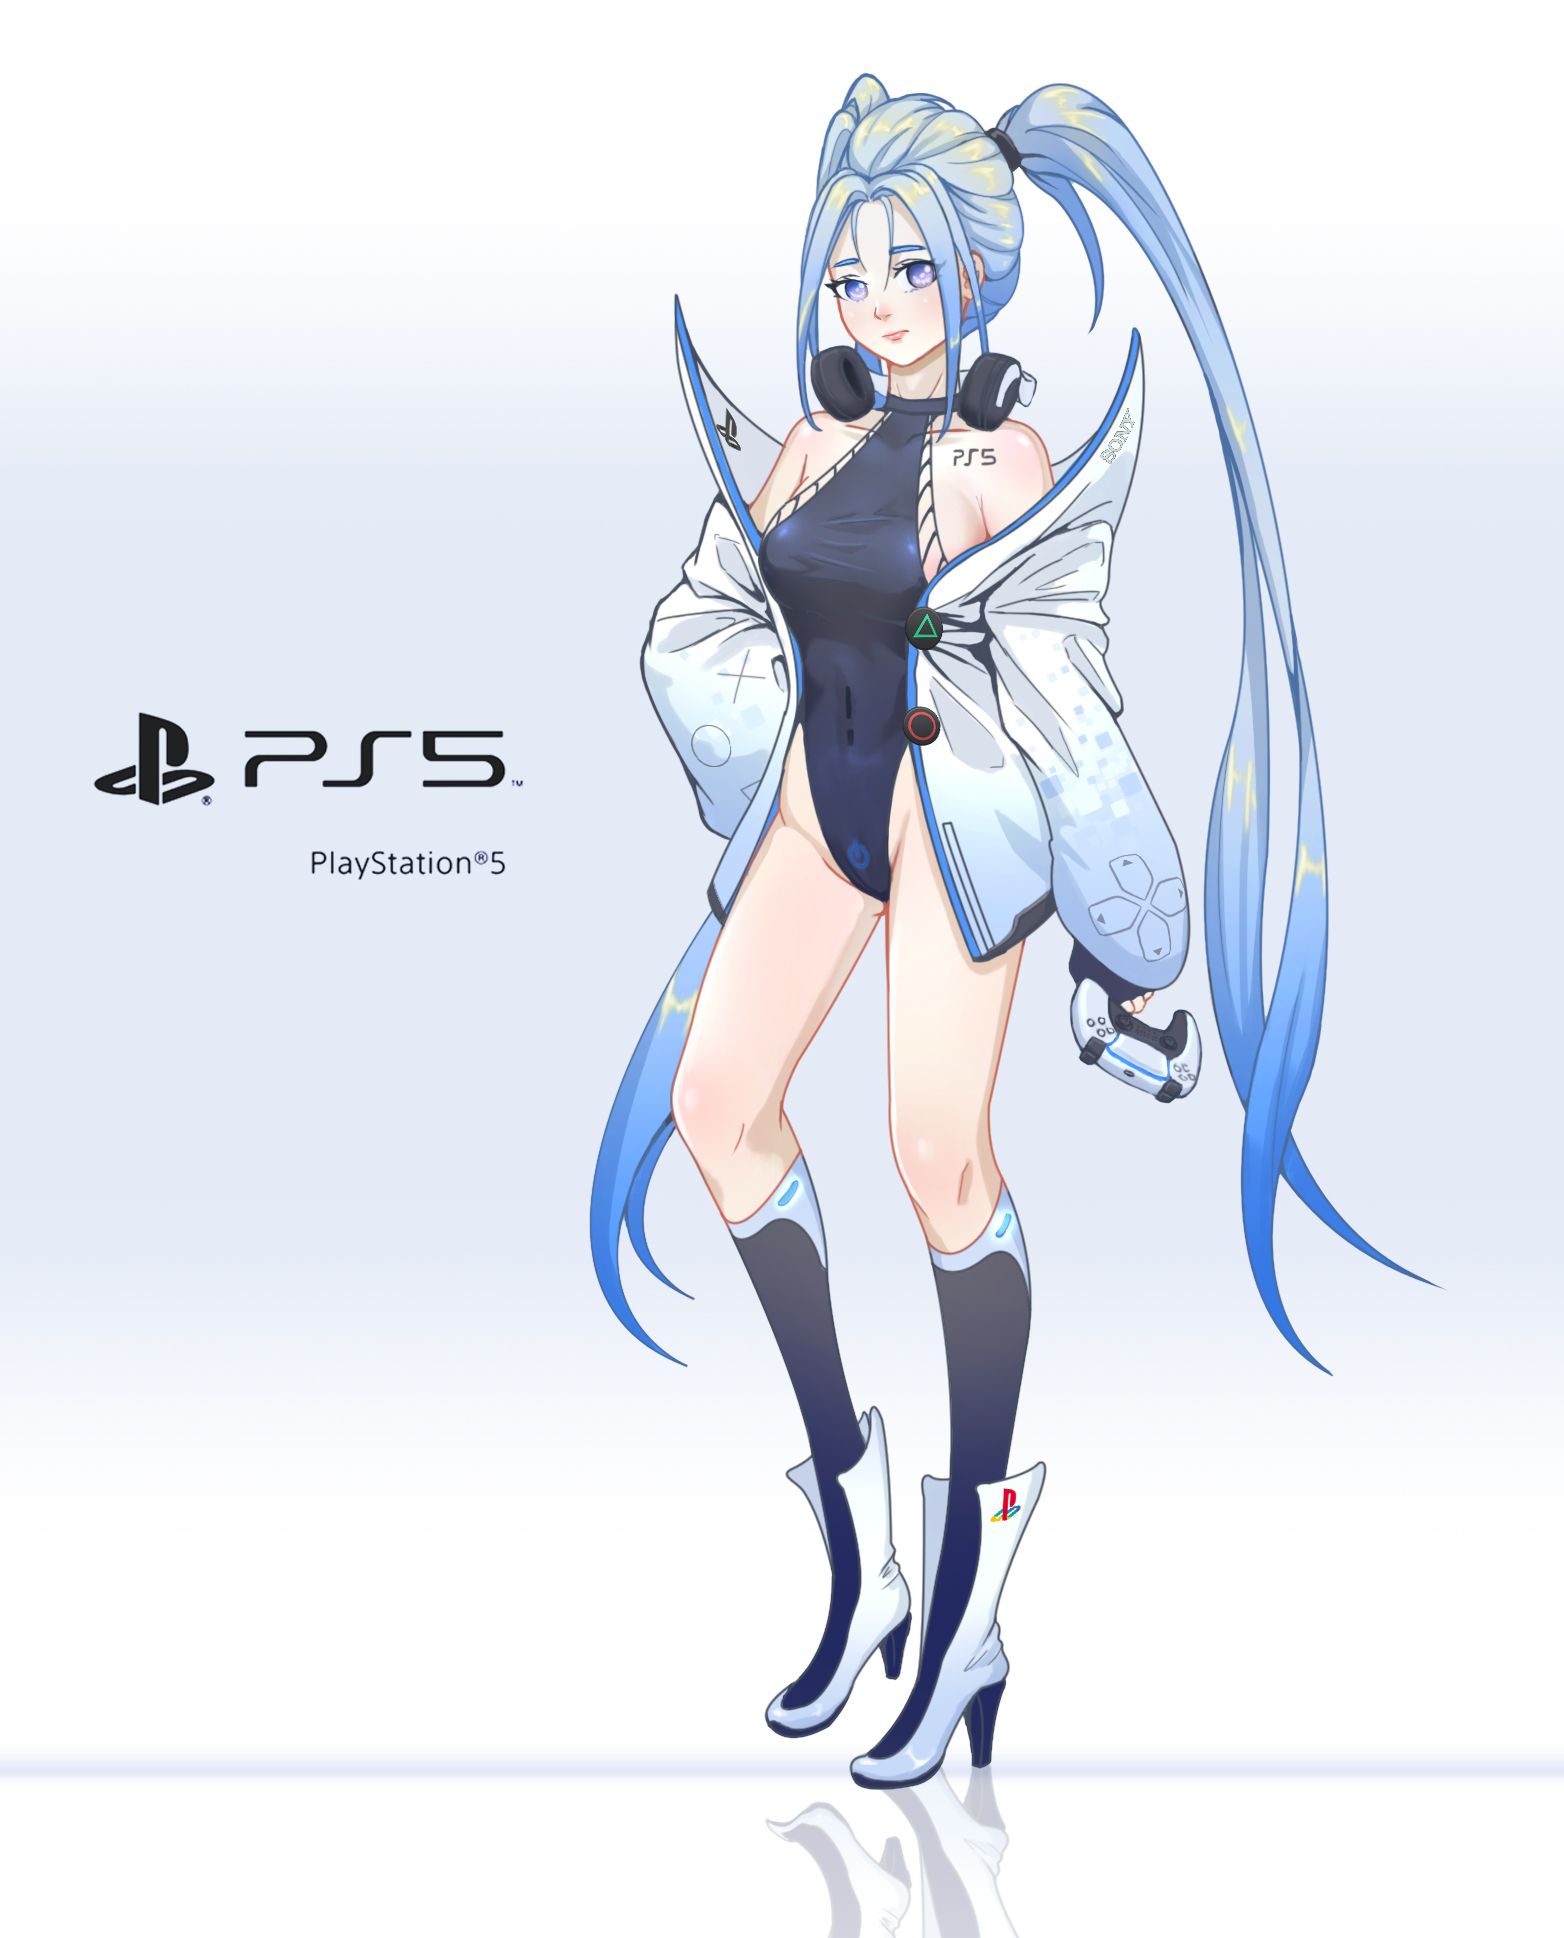 A different artist (Songjo Arts) also turned PS5 into an anime